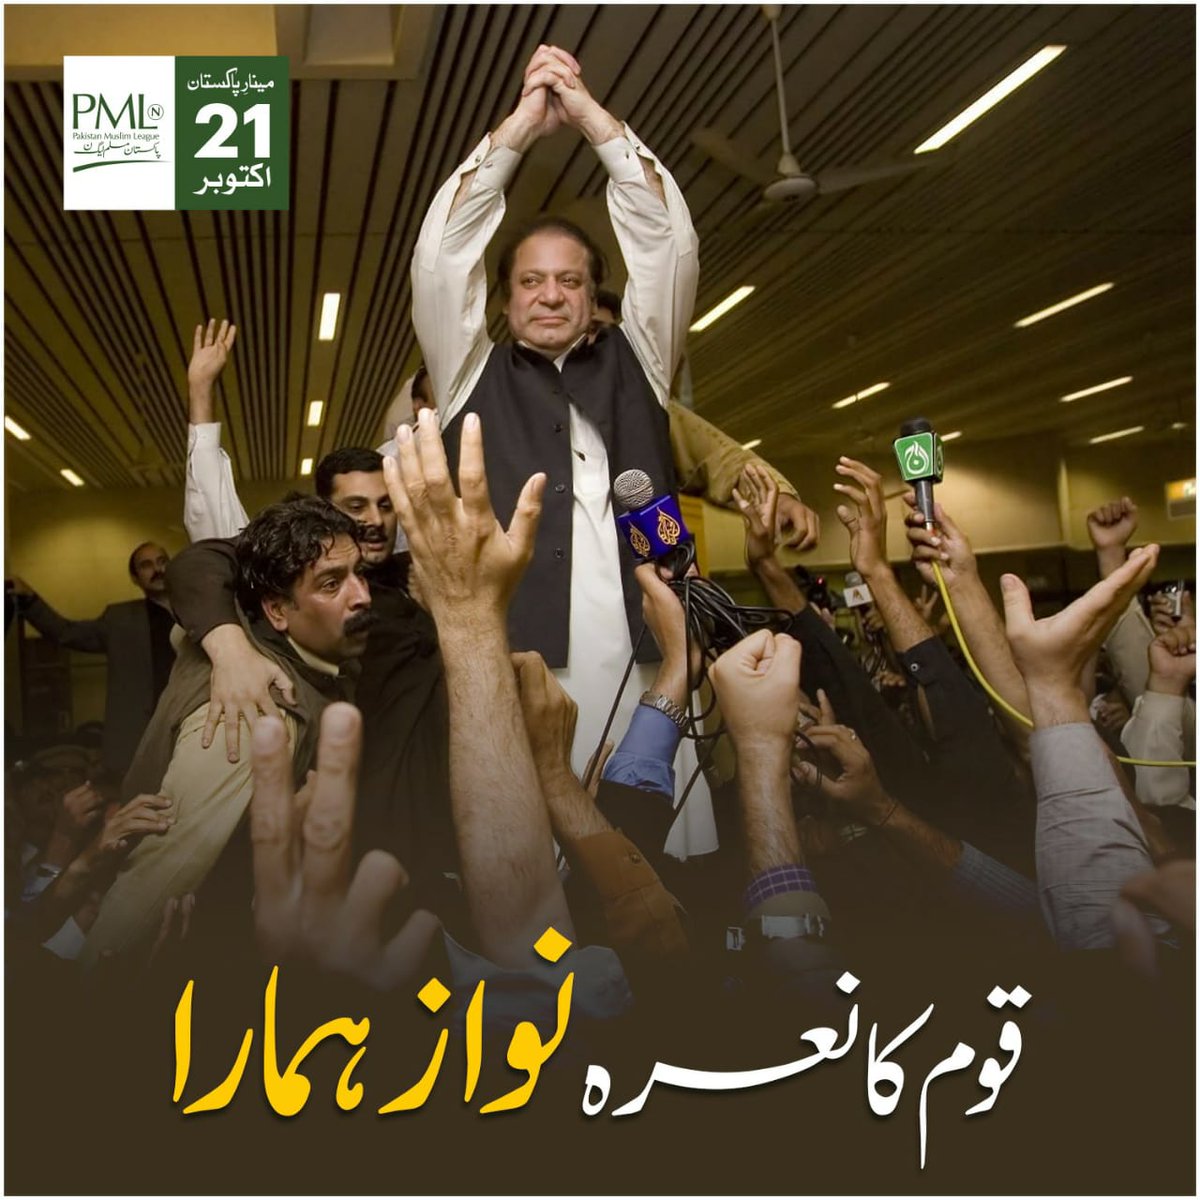 There's great hope with Nawaz Sharif's return. His leadership can steer the country towards progress and end unemployment. #NawazForEconomy